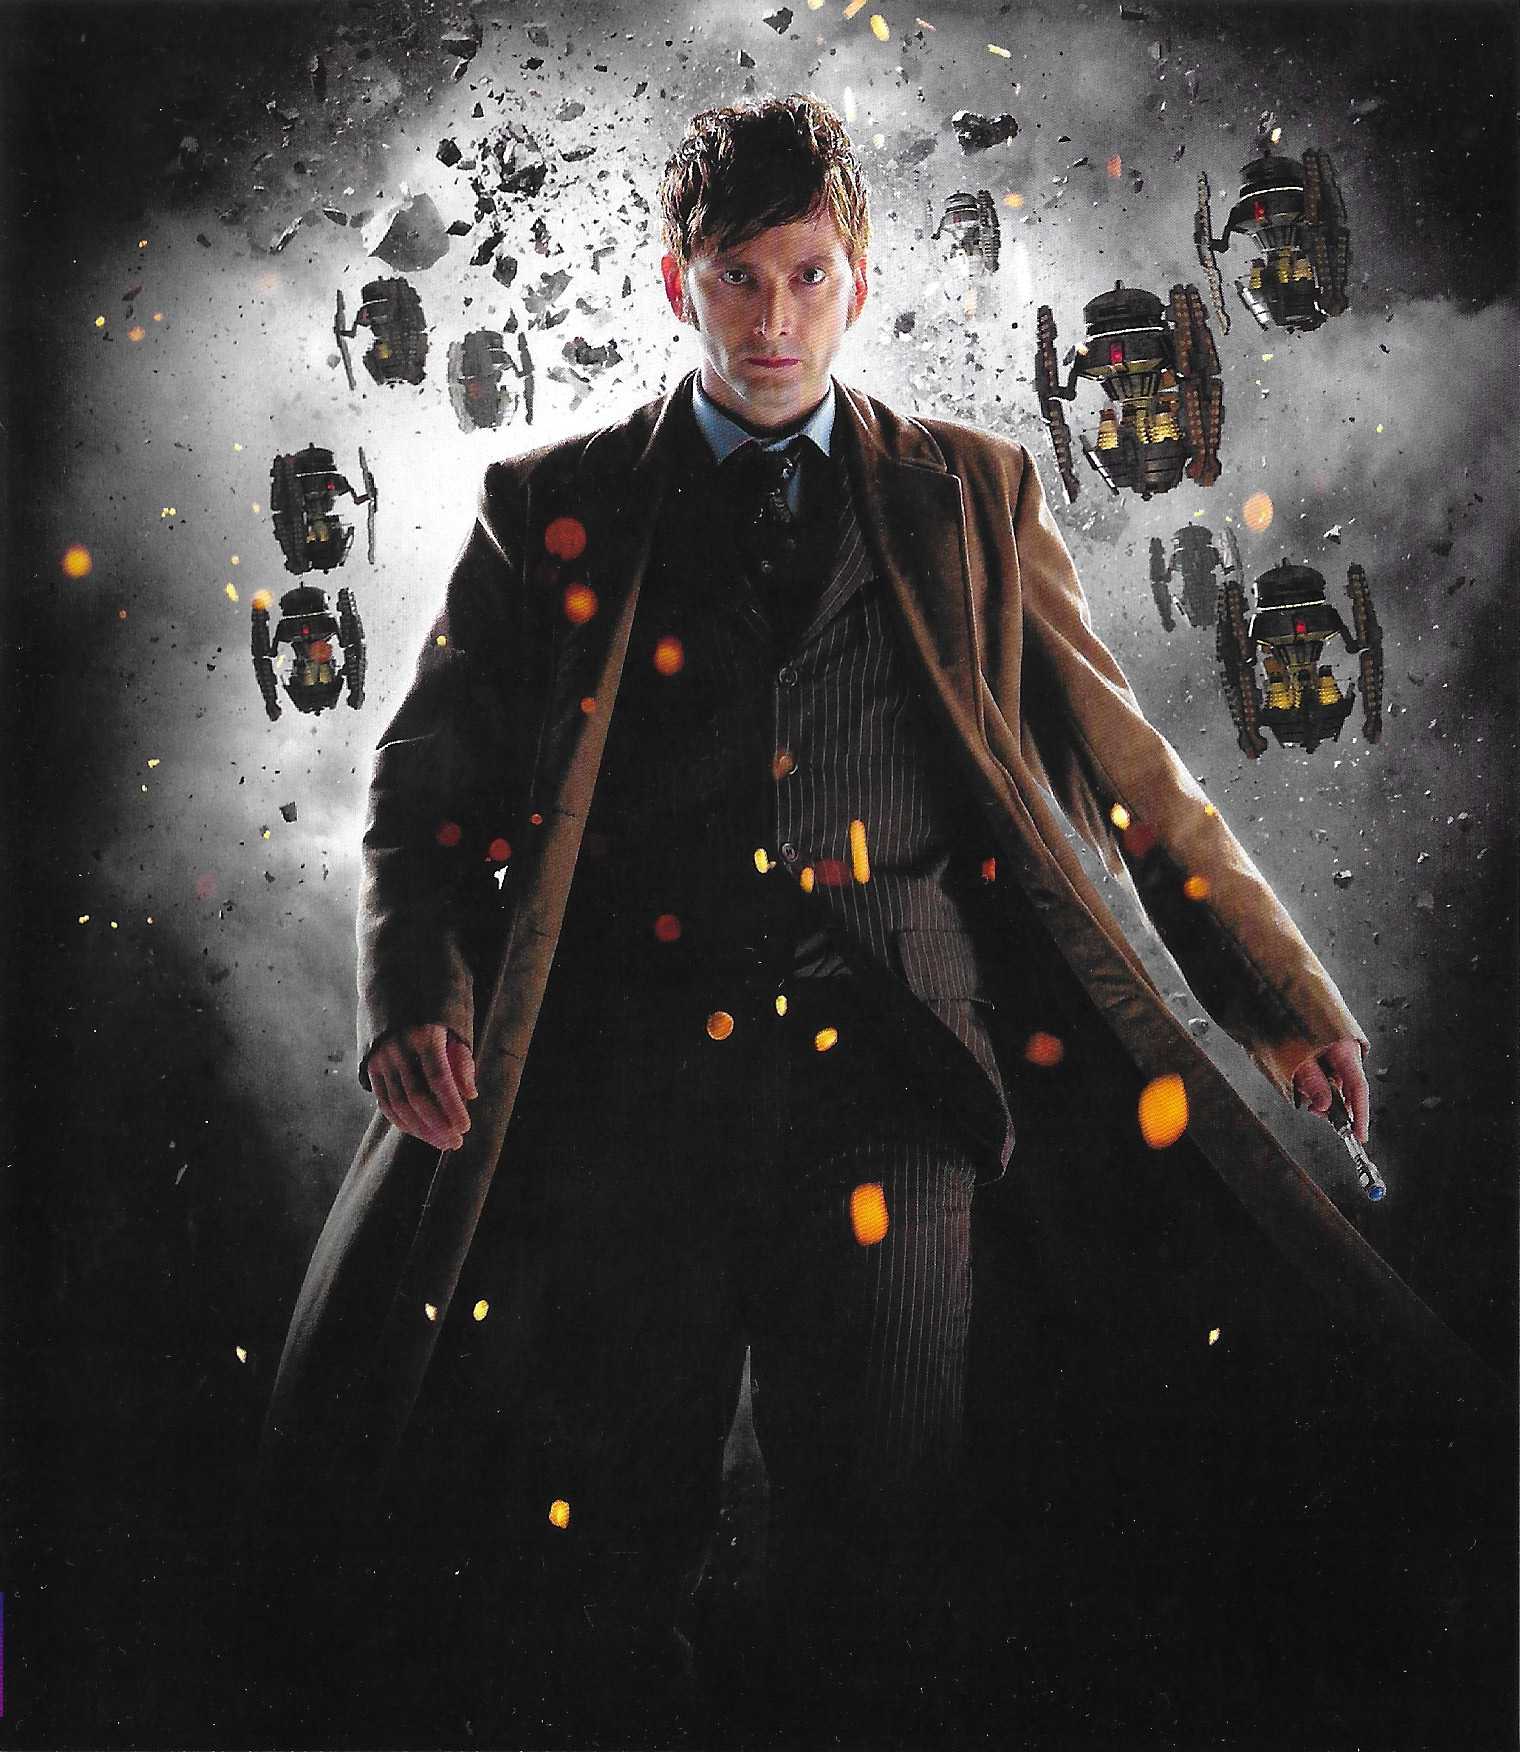 Picture of BBCBD 0271 02 Doctor Who - The day of the Doctor by artist Steven Moffat from the BBC blu-rays - Records and Tapes library